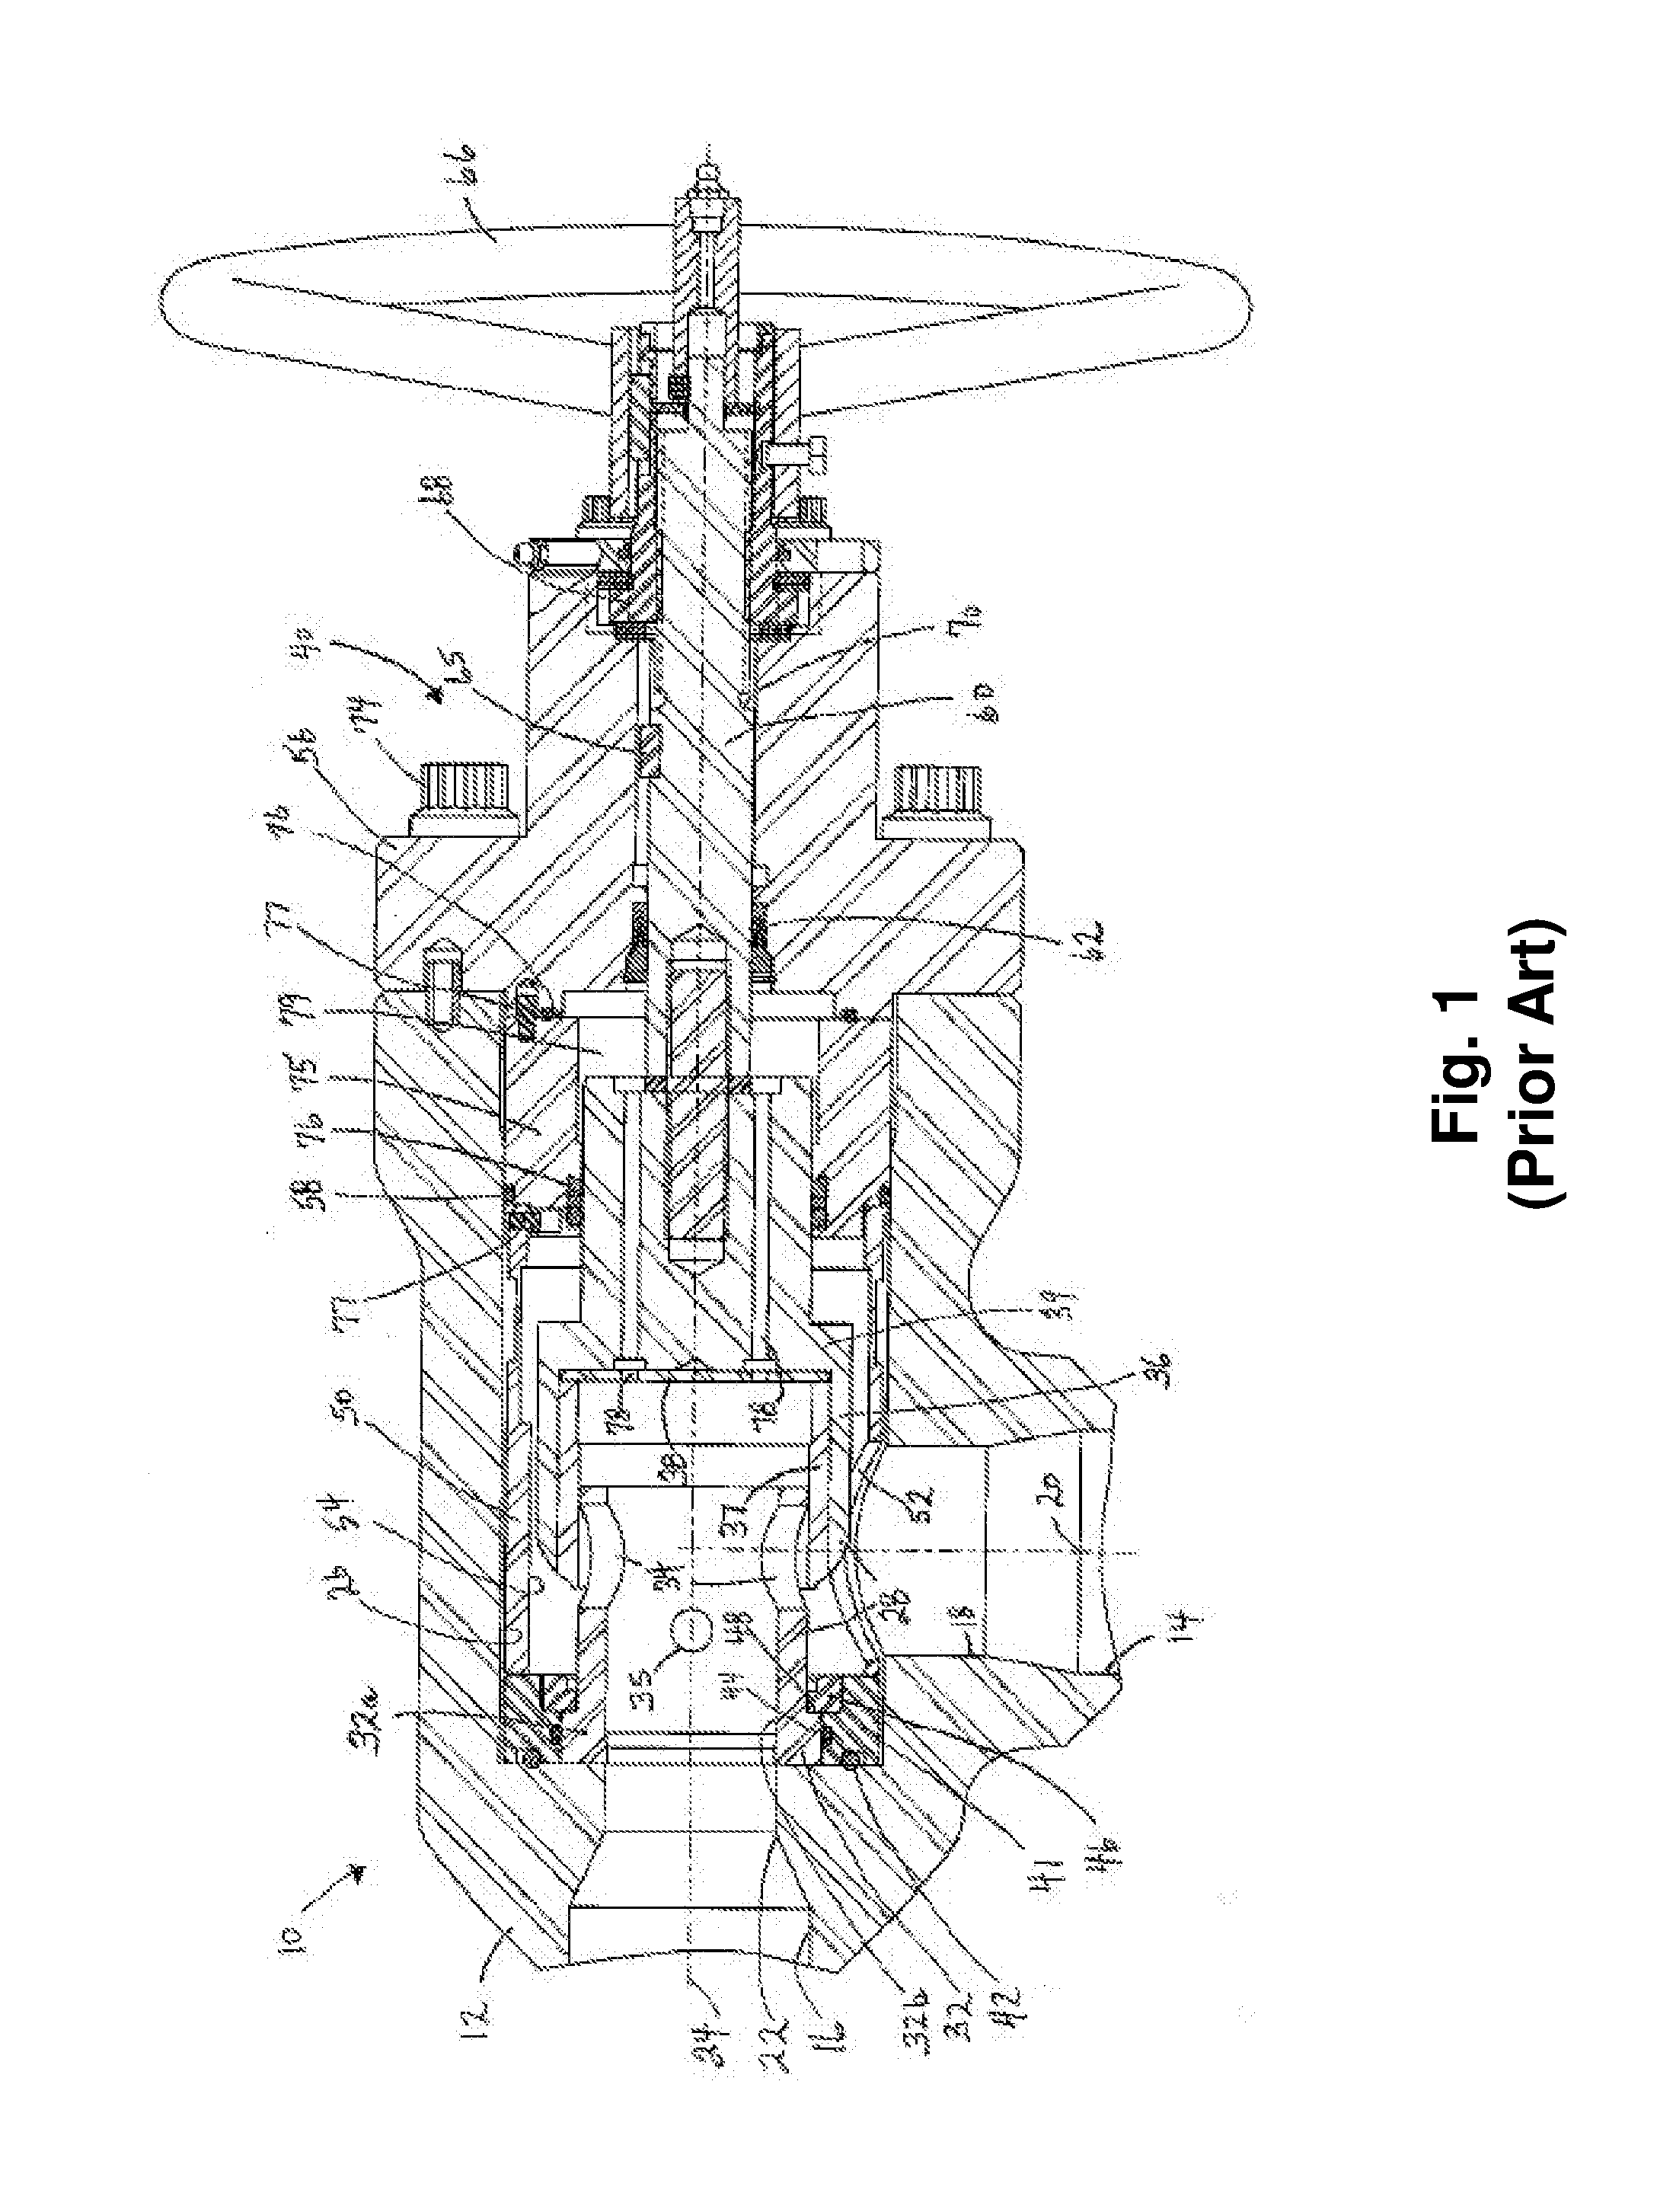 Cage Valve with Instrumentation